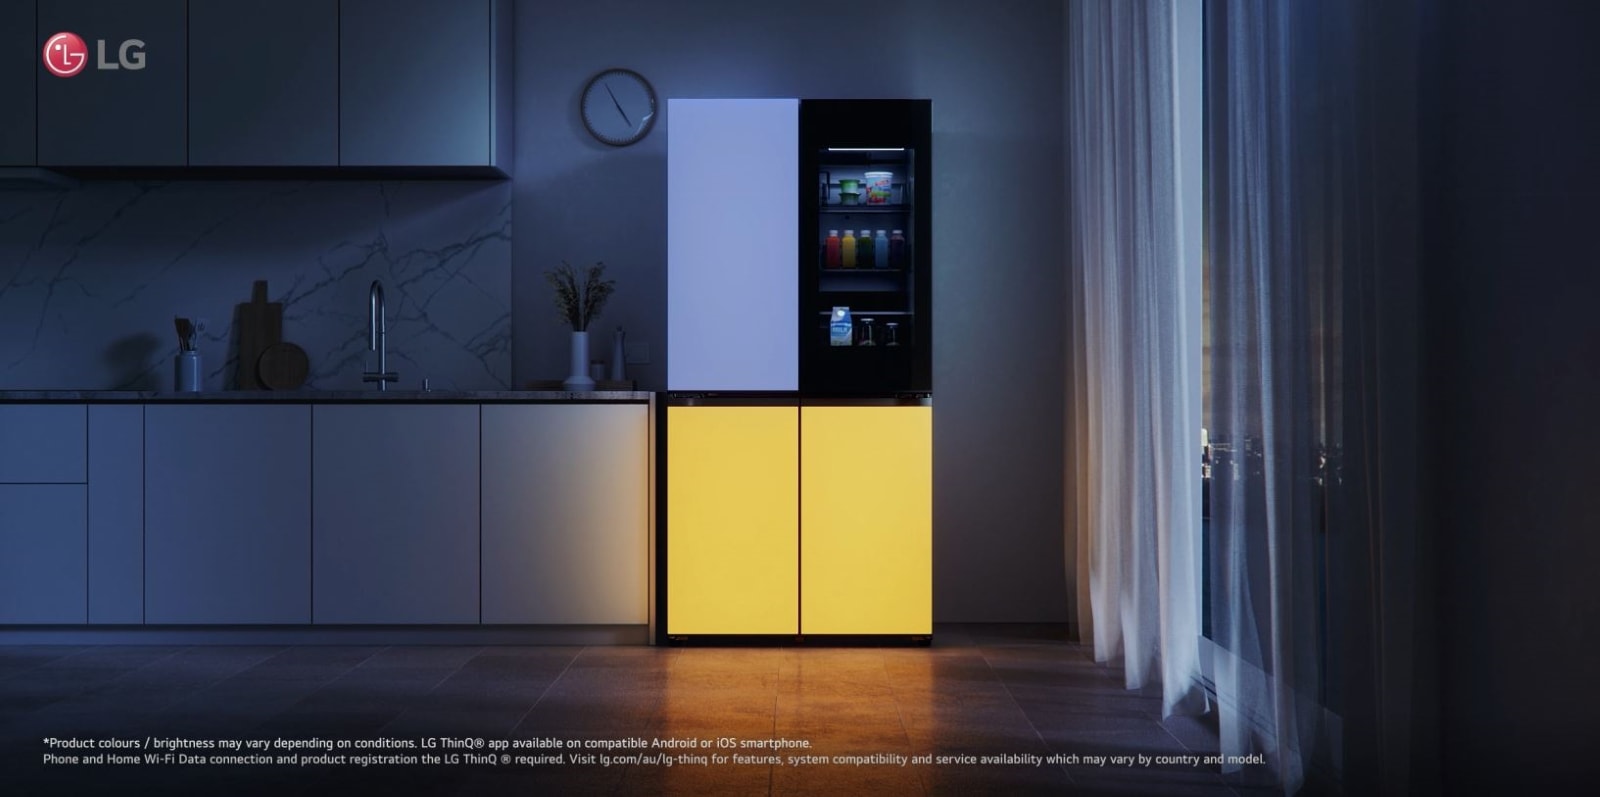 MoodUP fridge freezer lighting up a dark kitchen with a blue and yellow glow